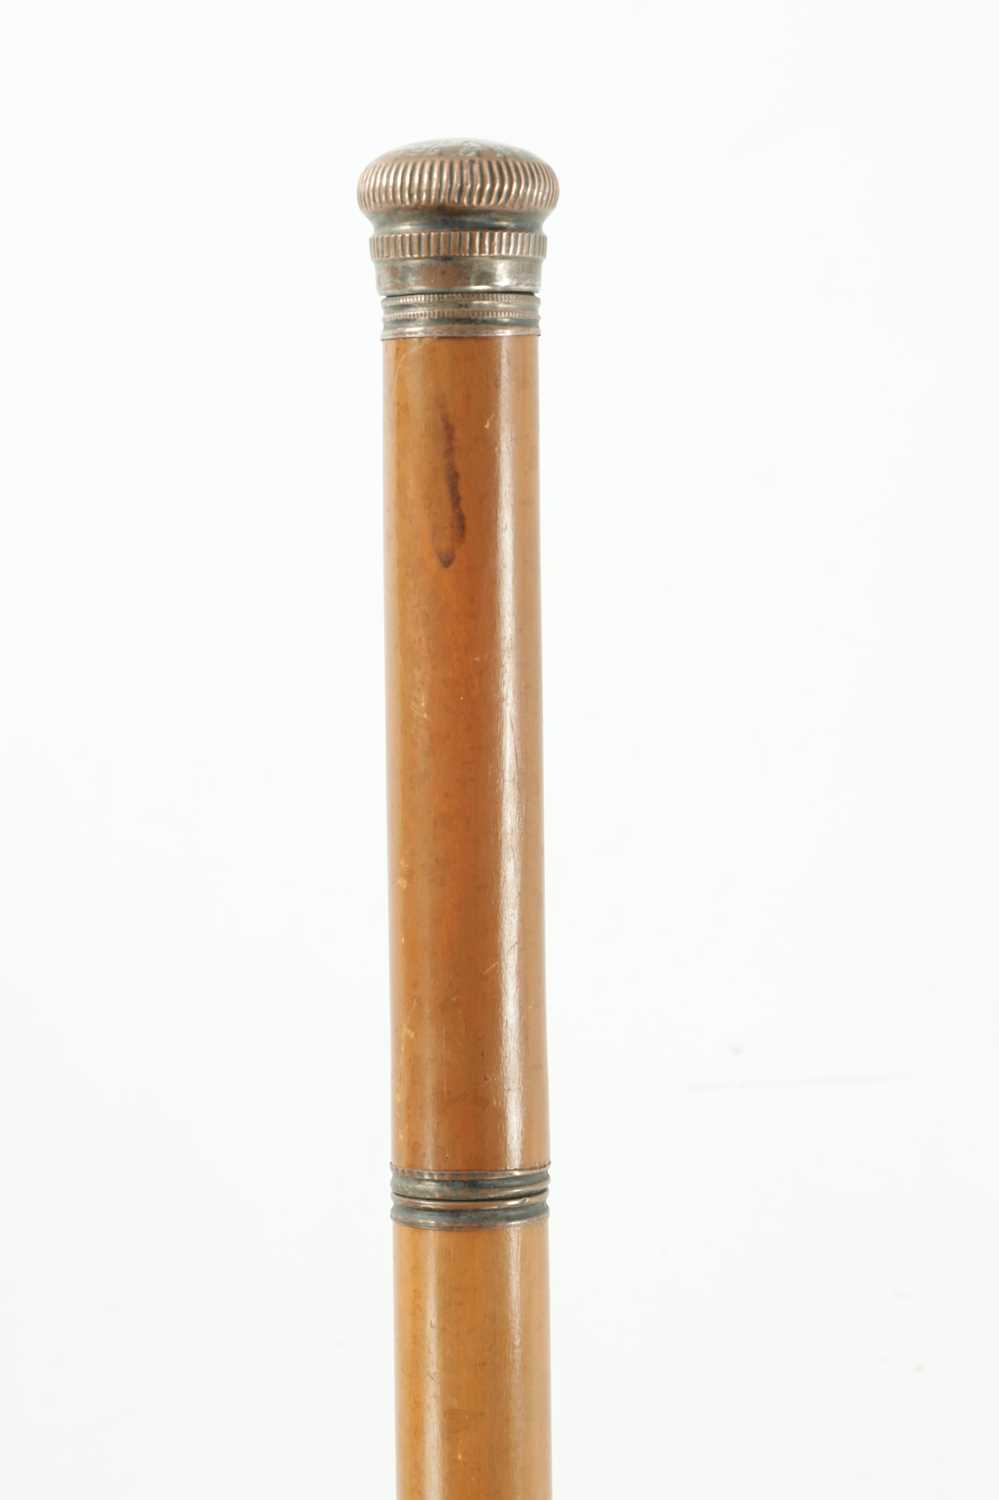 AN EARLY 20TH CENTURY MALACCA CANE WALKING STICK FITTED WITH GLASS DECANTER - Image 2 of 6